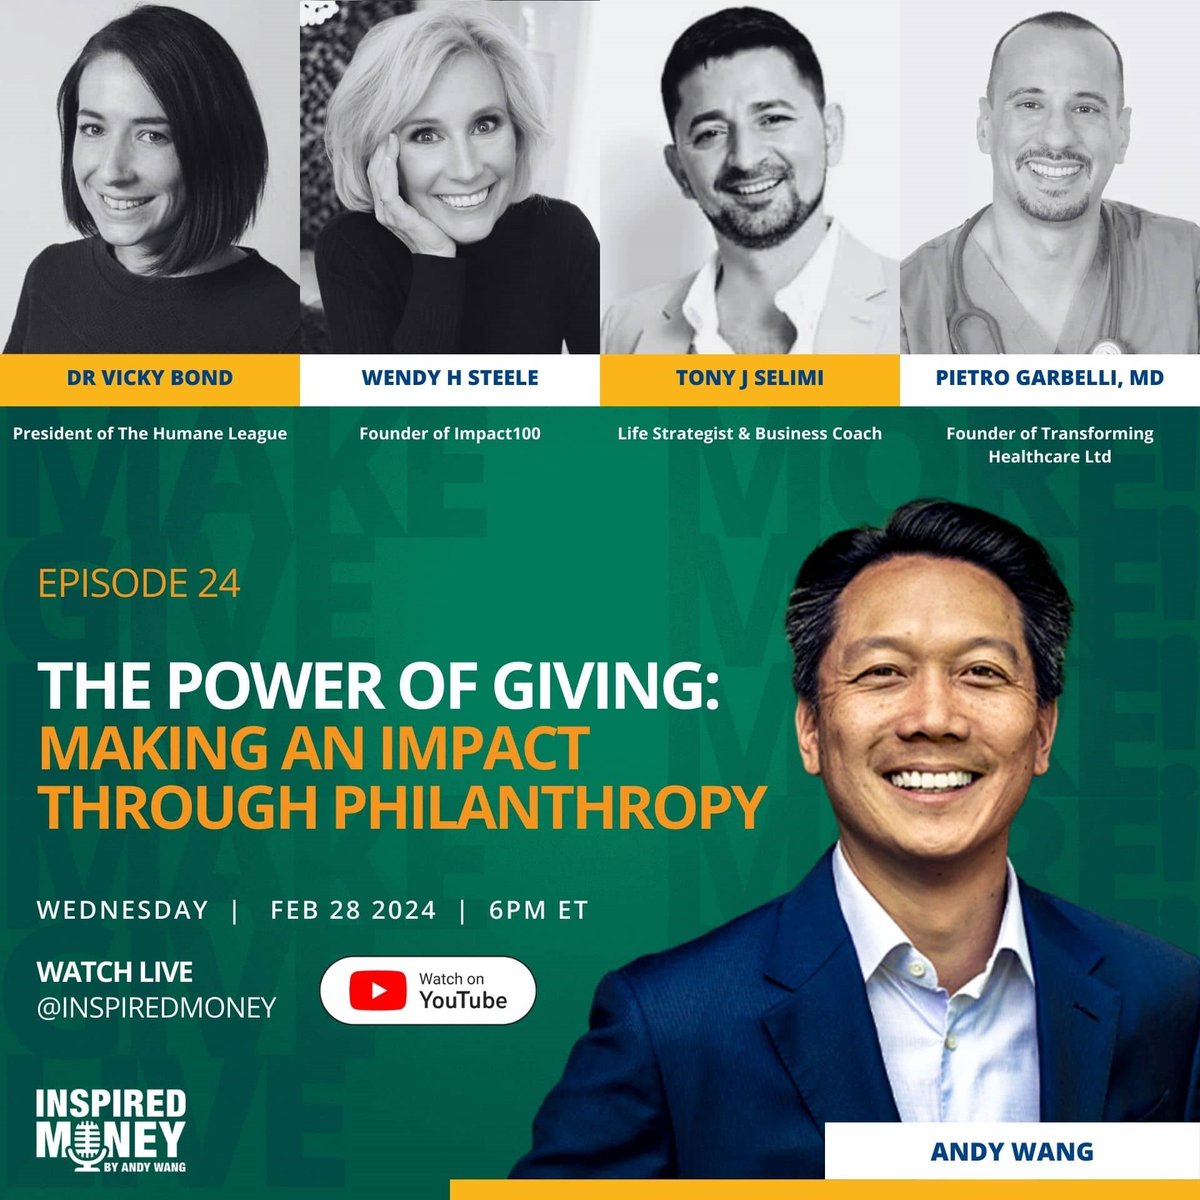 Join us as we explore philanthropy with guest panelists: @vickybond_THL, @WendySteele, @TonyJSelimi, and @DrGarbelli. Explore the joy of giving, leaving a lasting legacy, the power of educational philanthropy, and more! youtube.com/watch?v=TIyLpS…